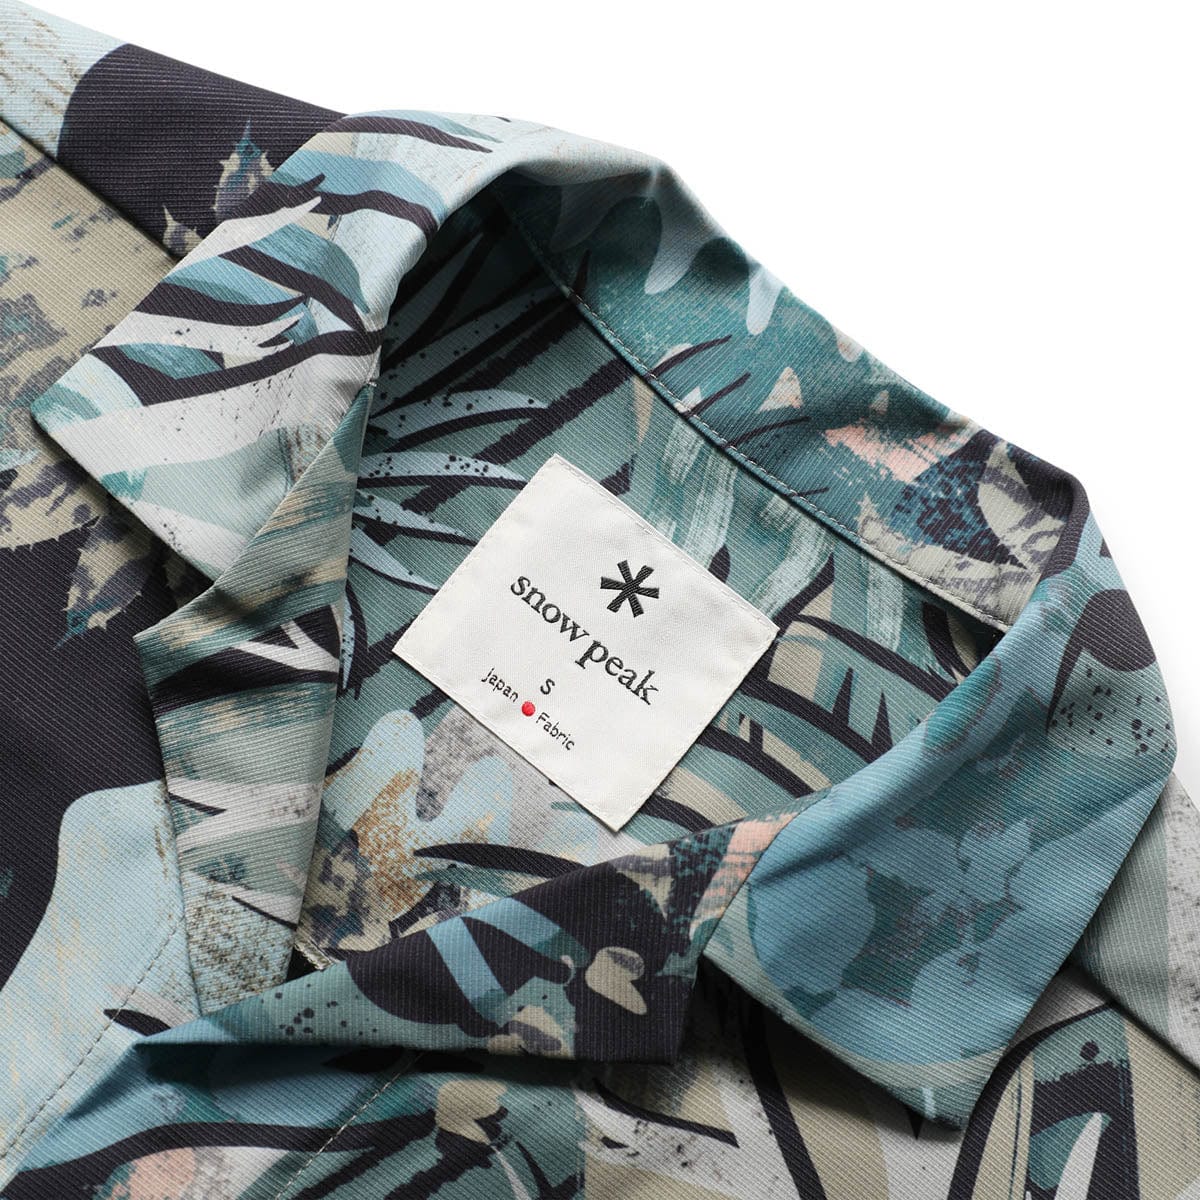 PRINTED BREATHABLE QUICK DRY SHIRT